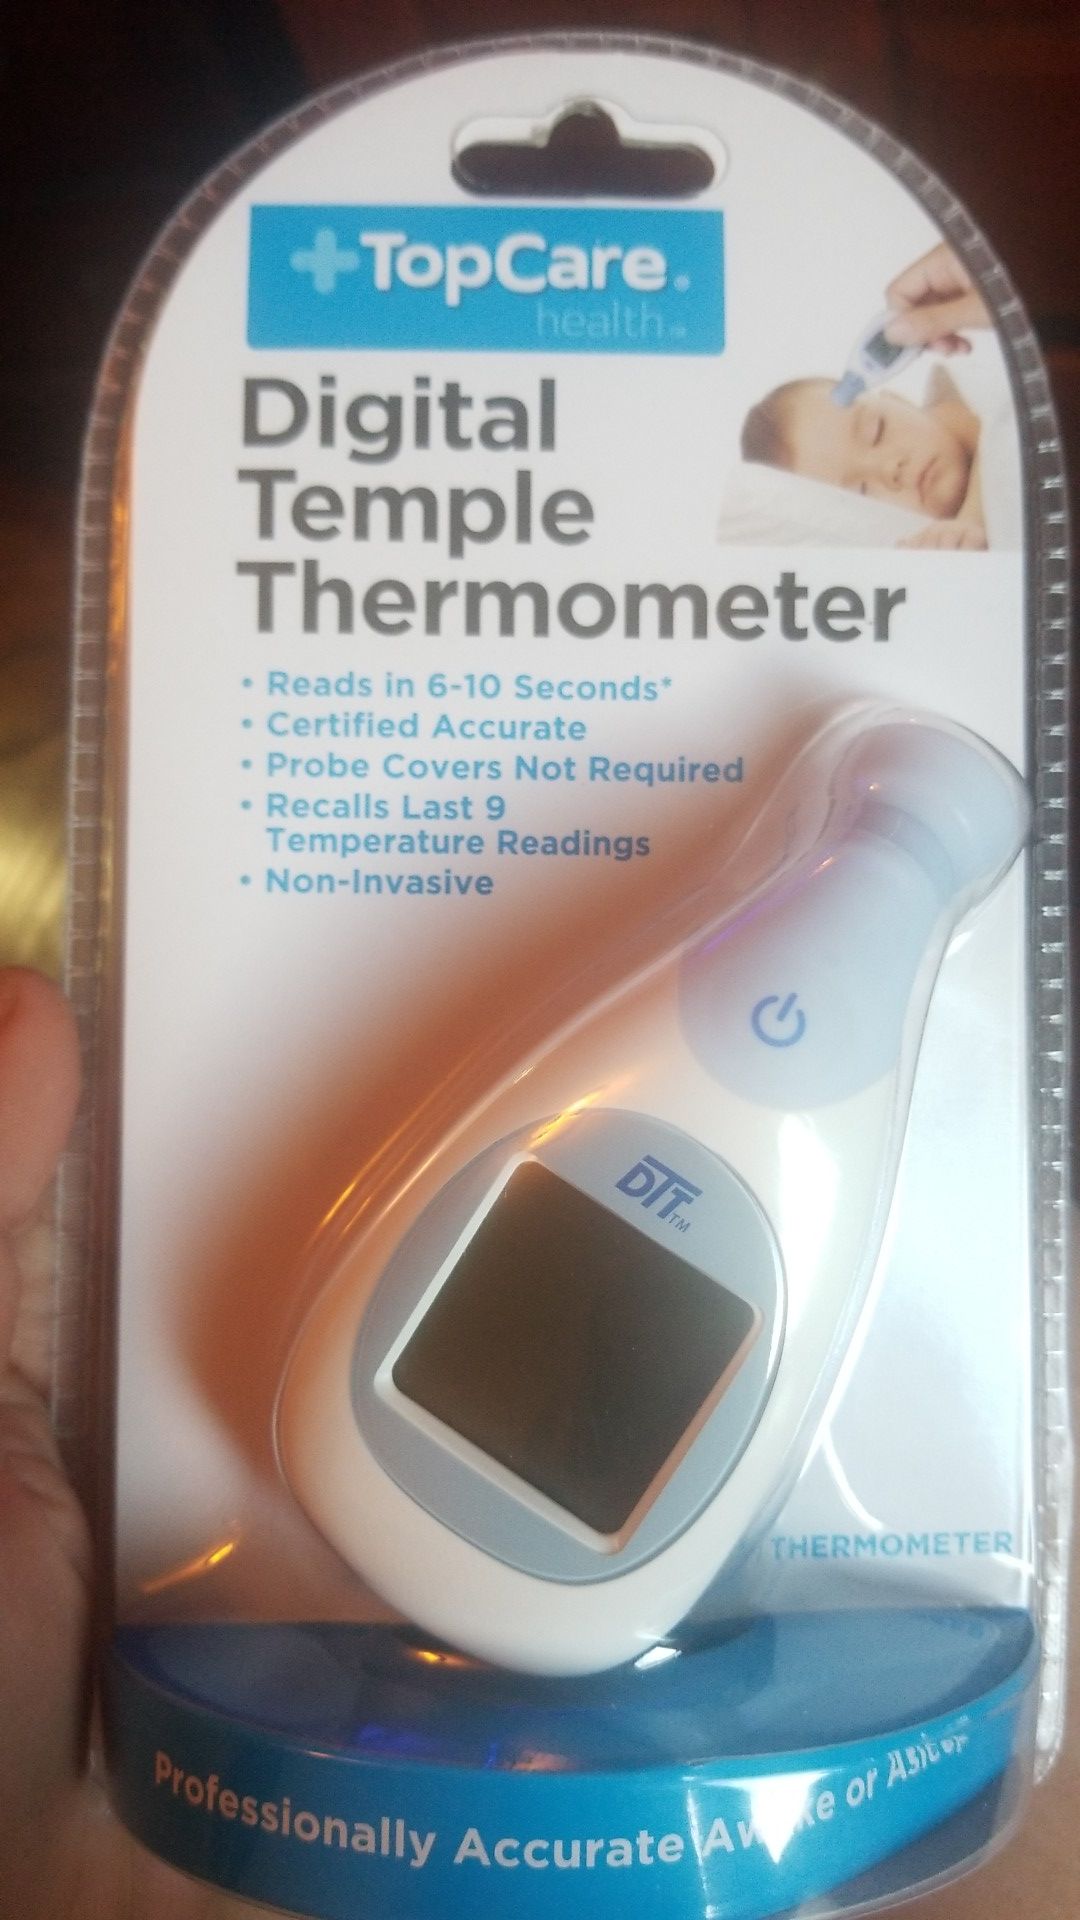 Top care health digital temple thermometer